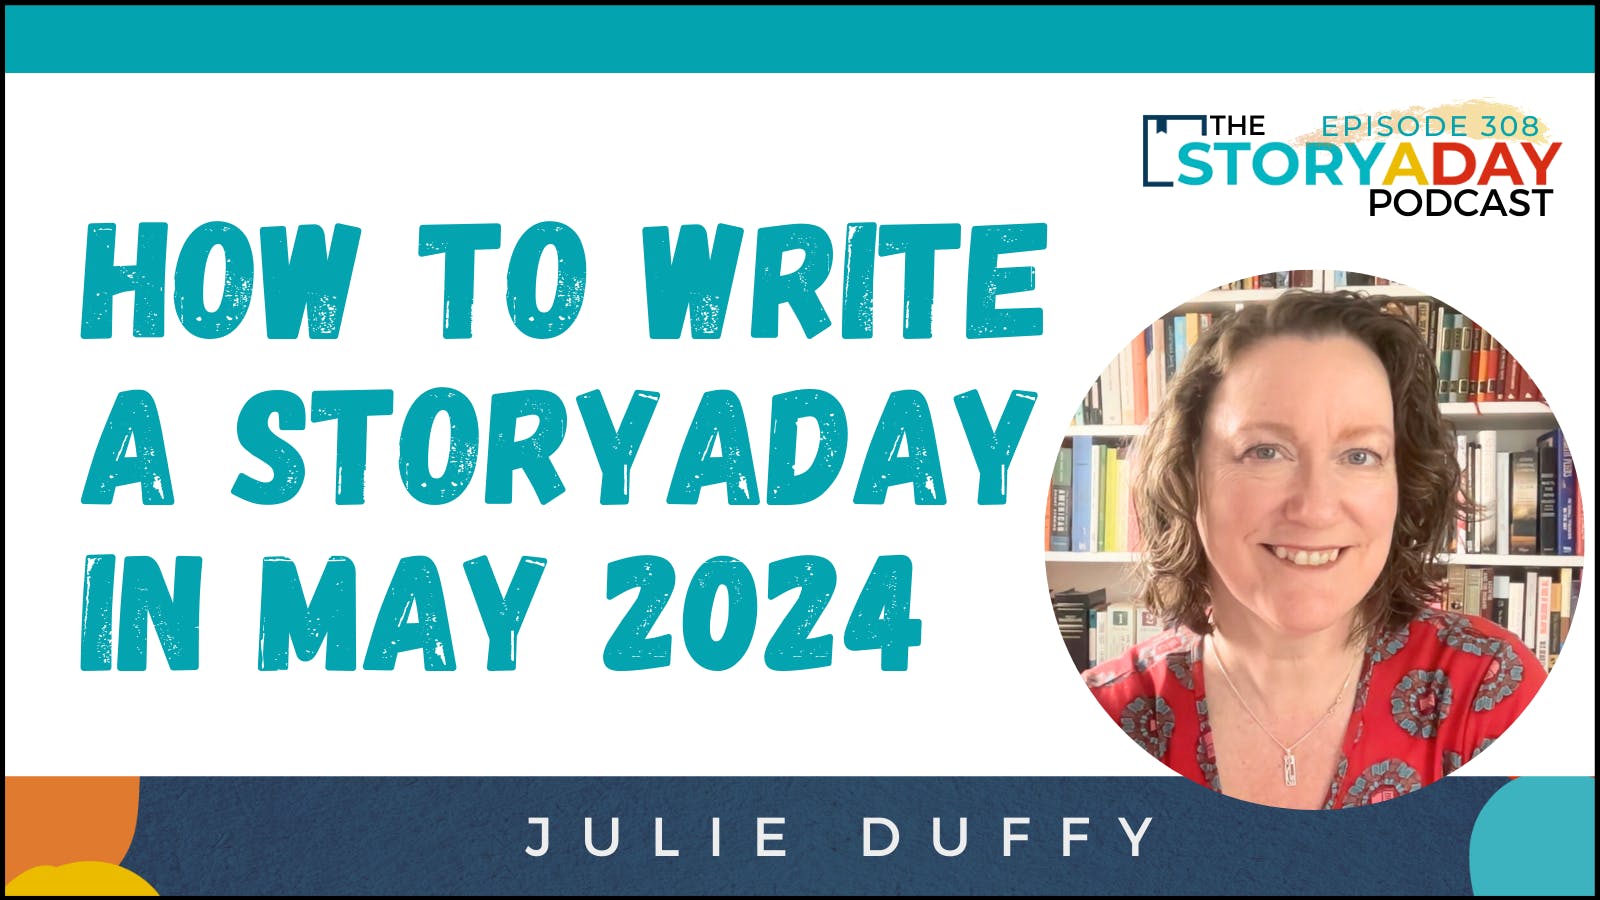 Image of the podcast cover, Julie smiling along with the words "How to write a storyaday in May 2024"